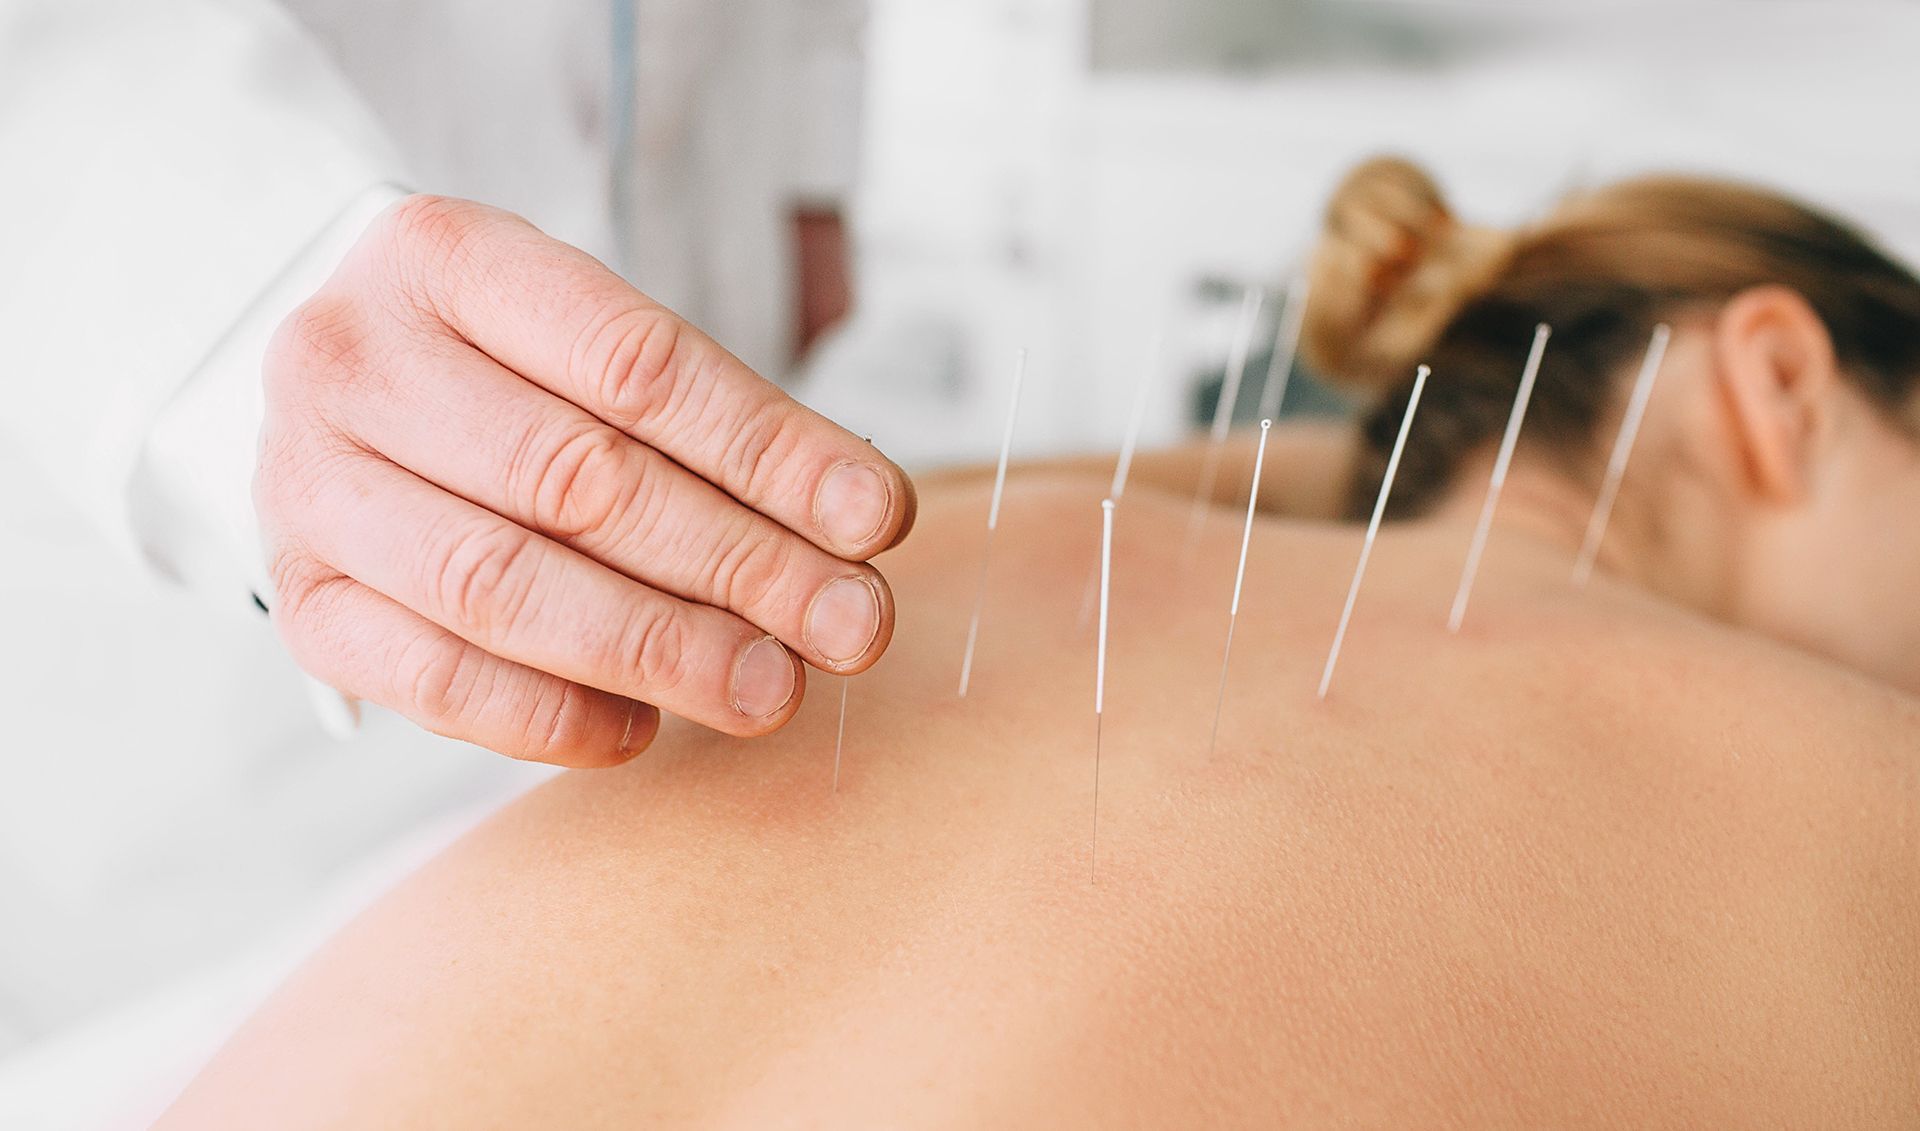 Image of a person receiving acupuncture treatment with thin needles inserted at specific points on the body. This therapy promotes natural healing and overall well-being.